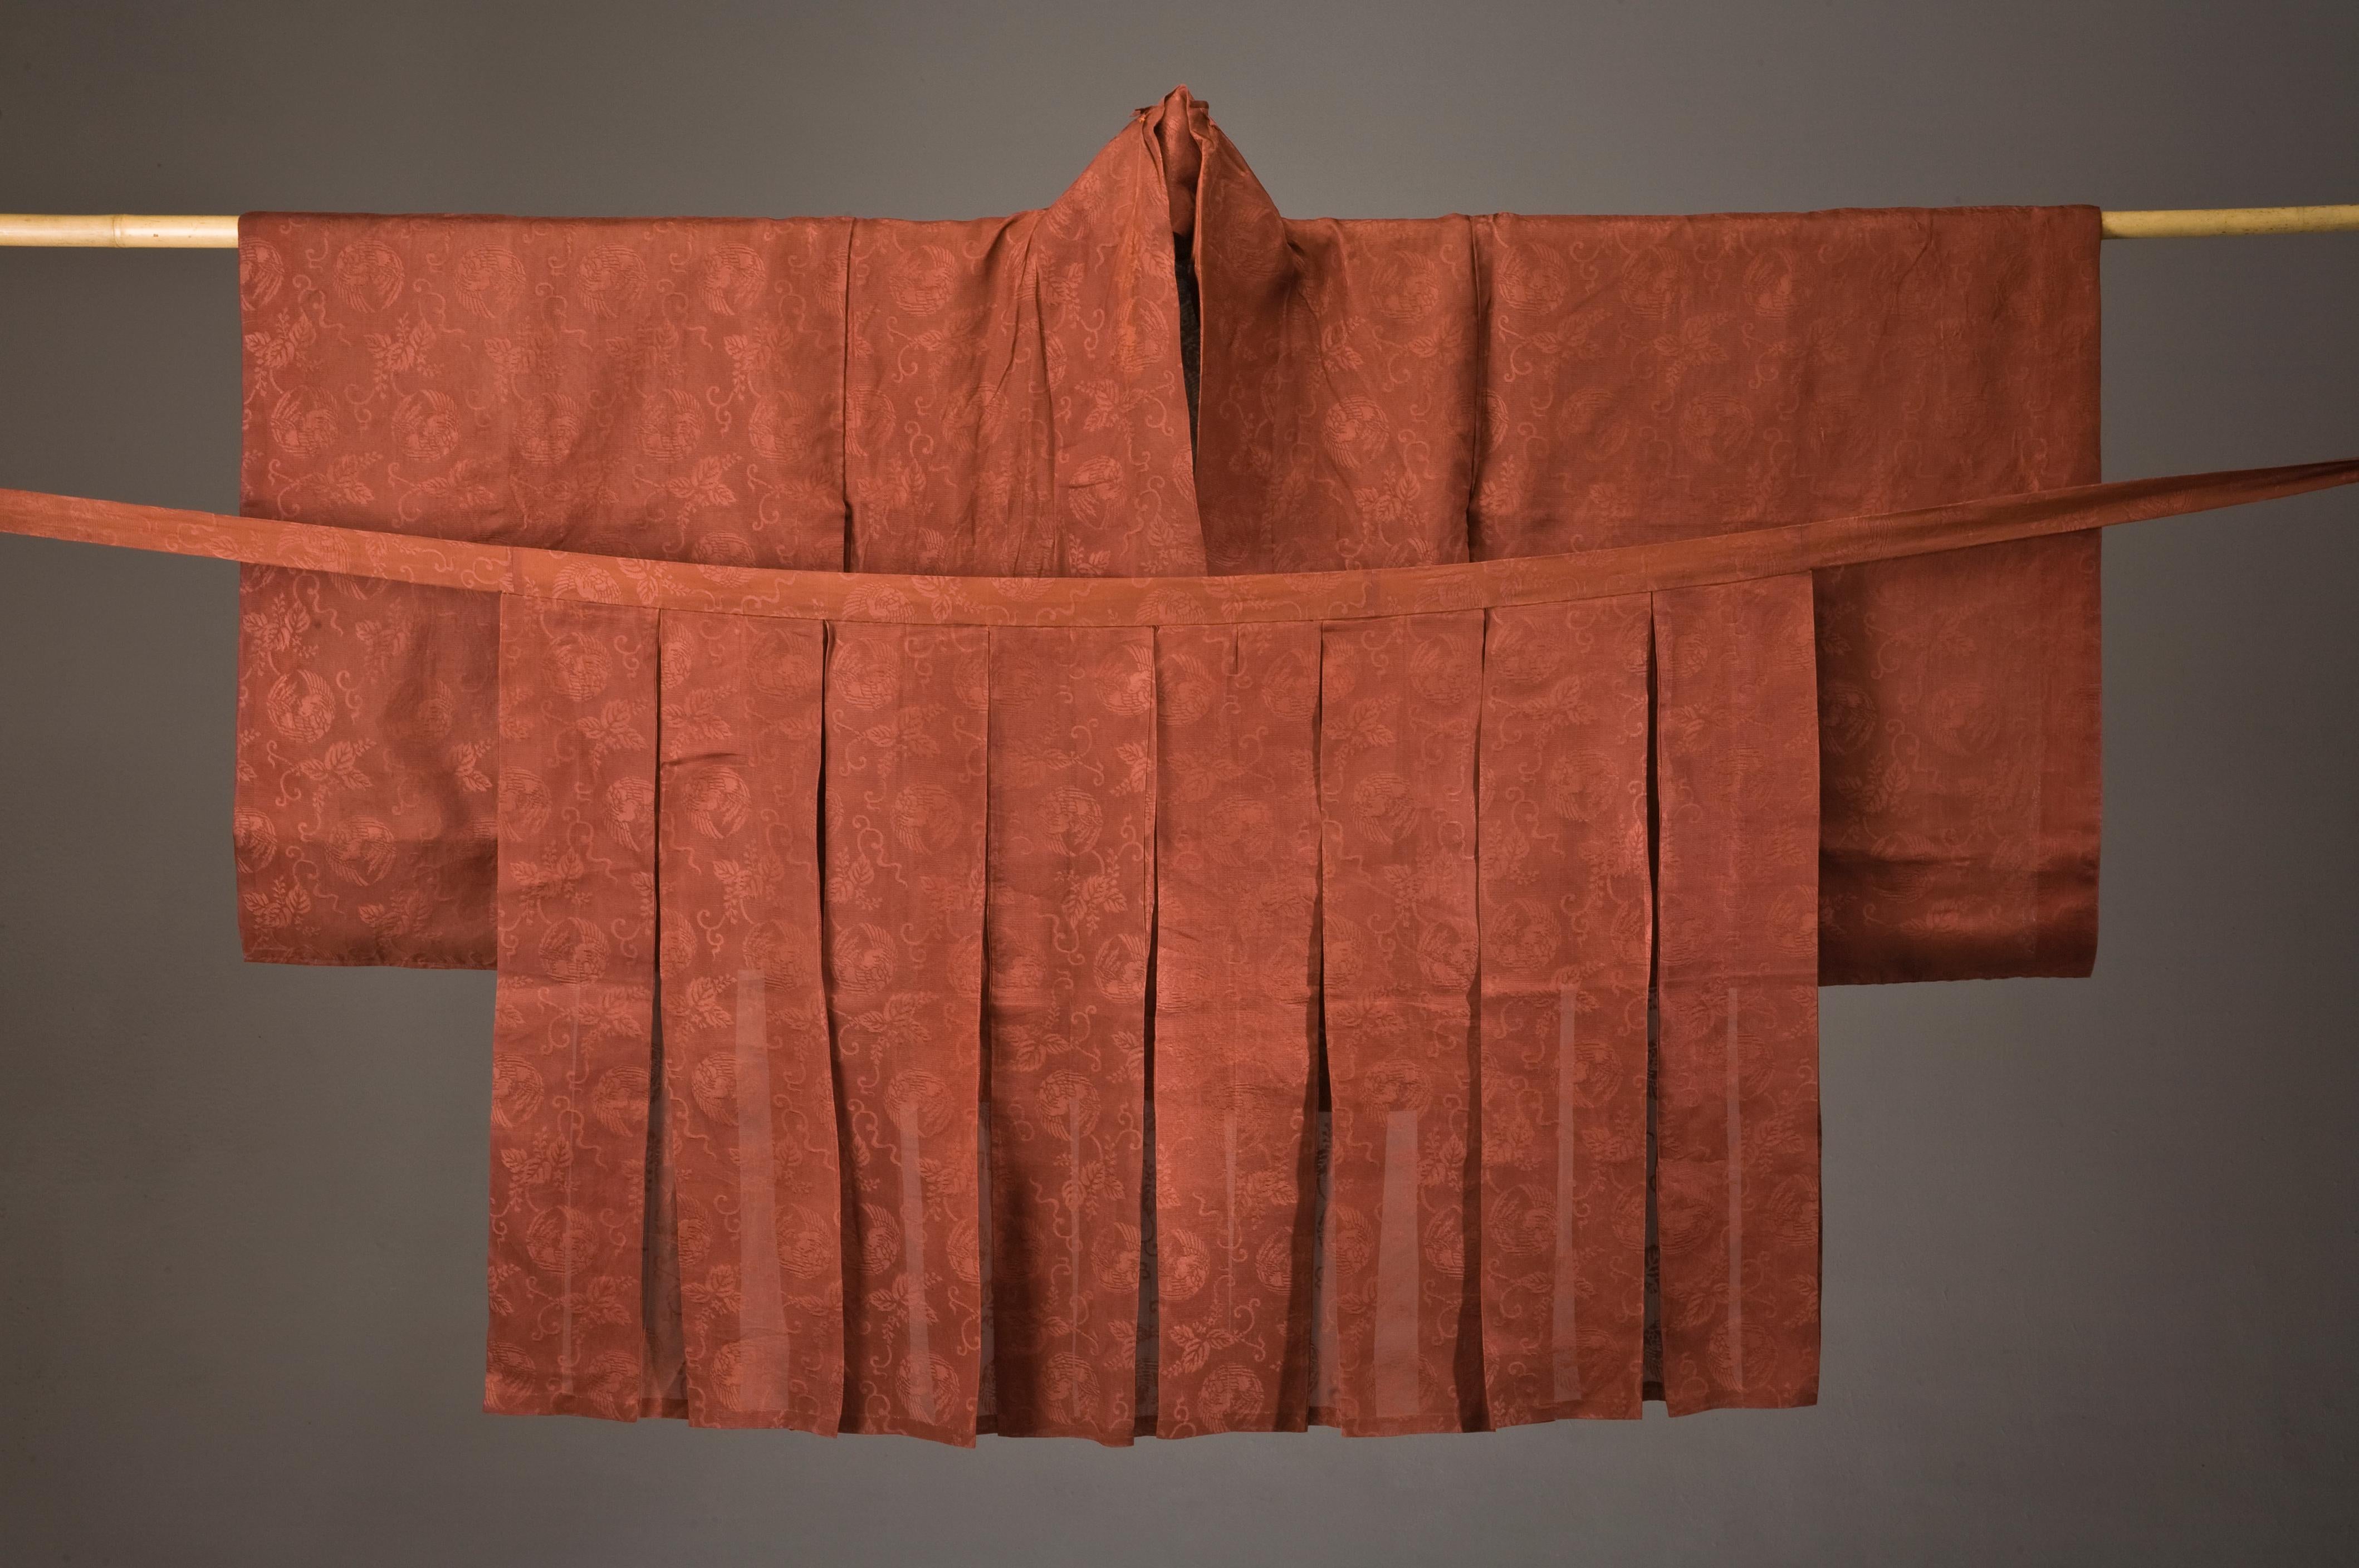 Shinto Monk Costume Set
Rinzu Silk Set of Shinto Monk Costume
The Design is in the Weaving. The Jacket is lined in Silk. 
Burgundy Color is Very Rich. The Kimono type Jacket is lined in Silk. 
Entire two Jacket items are all Hand-Stitched.